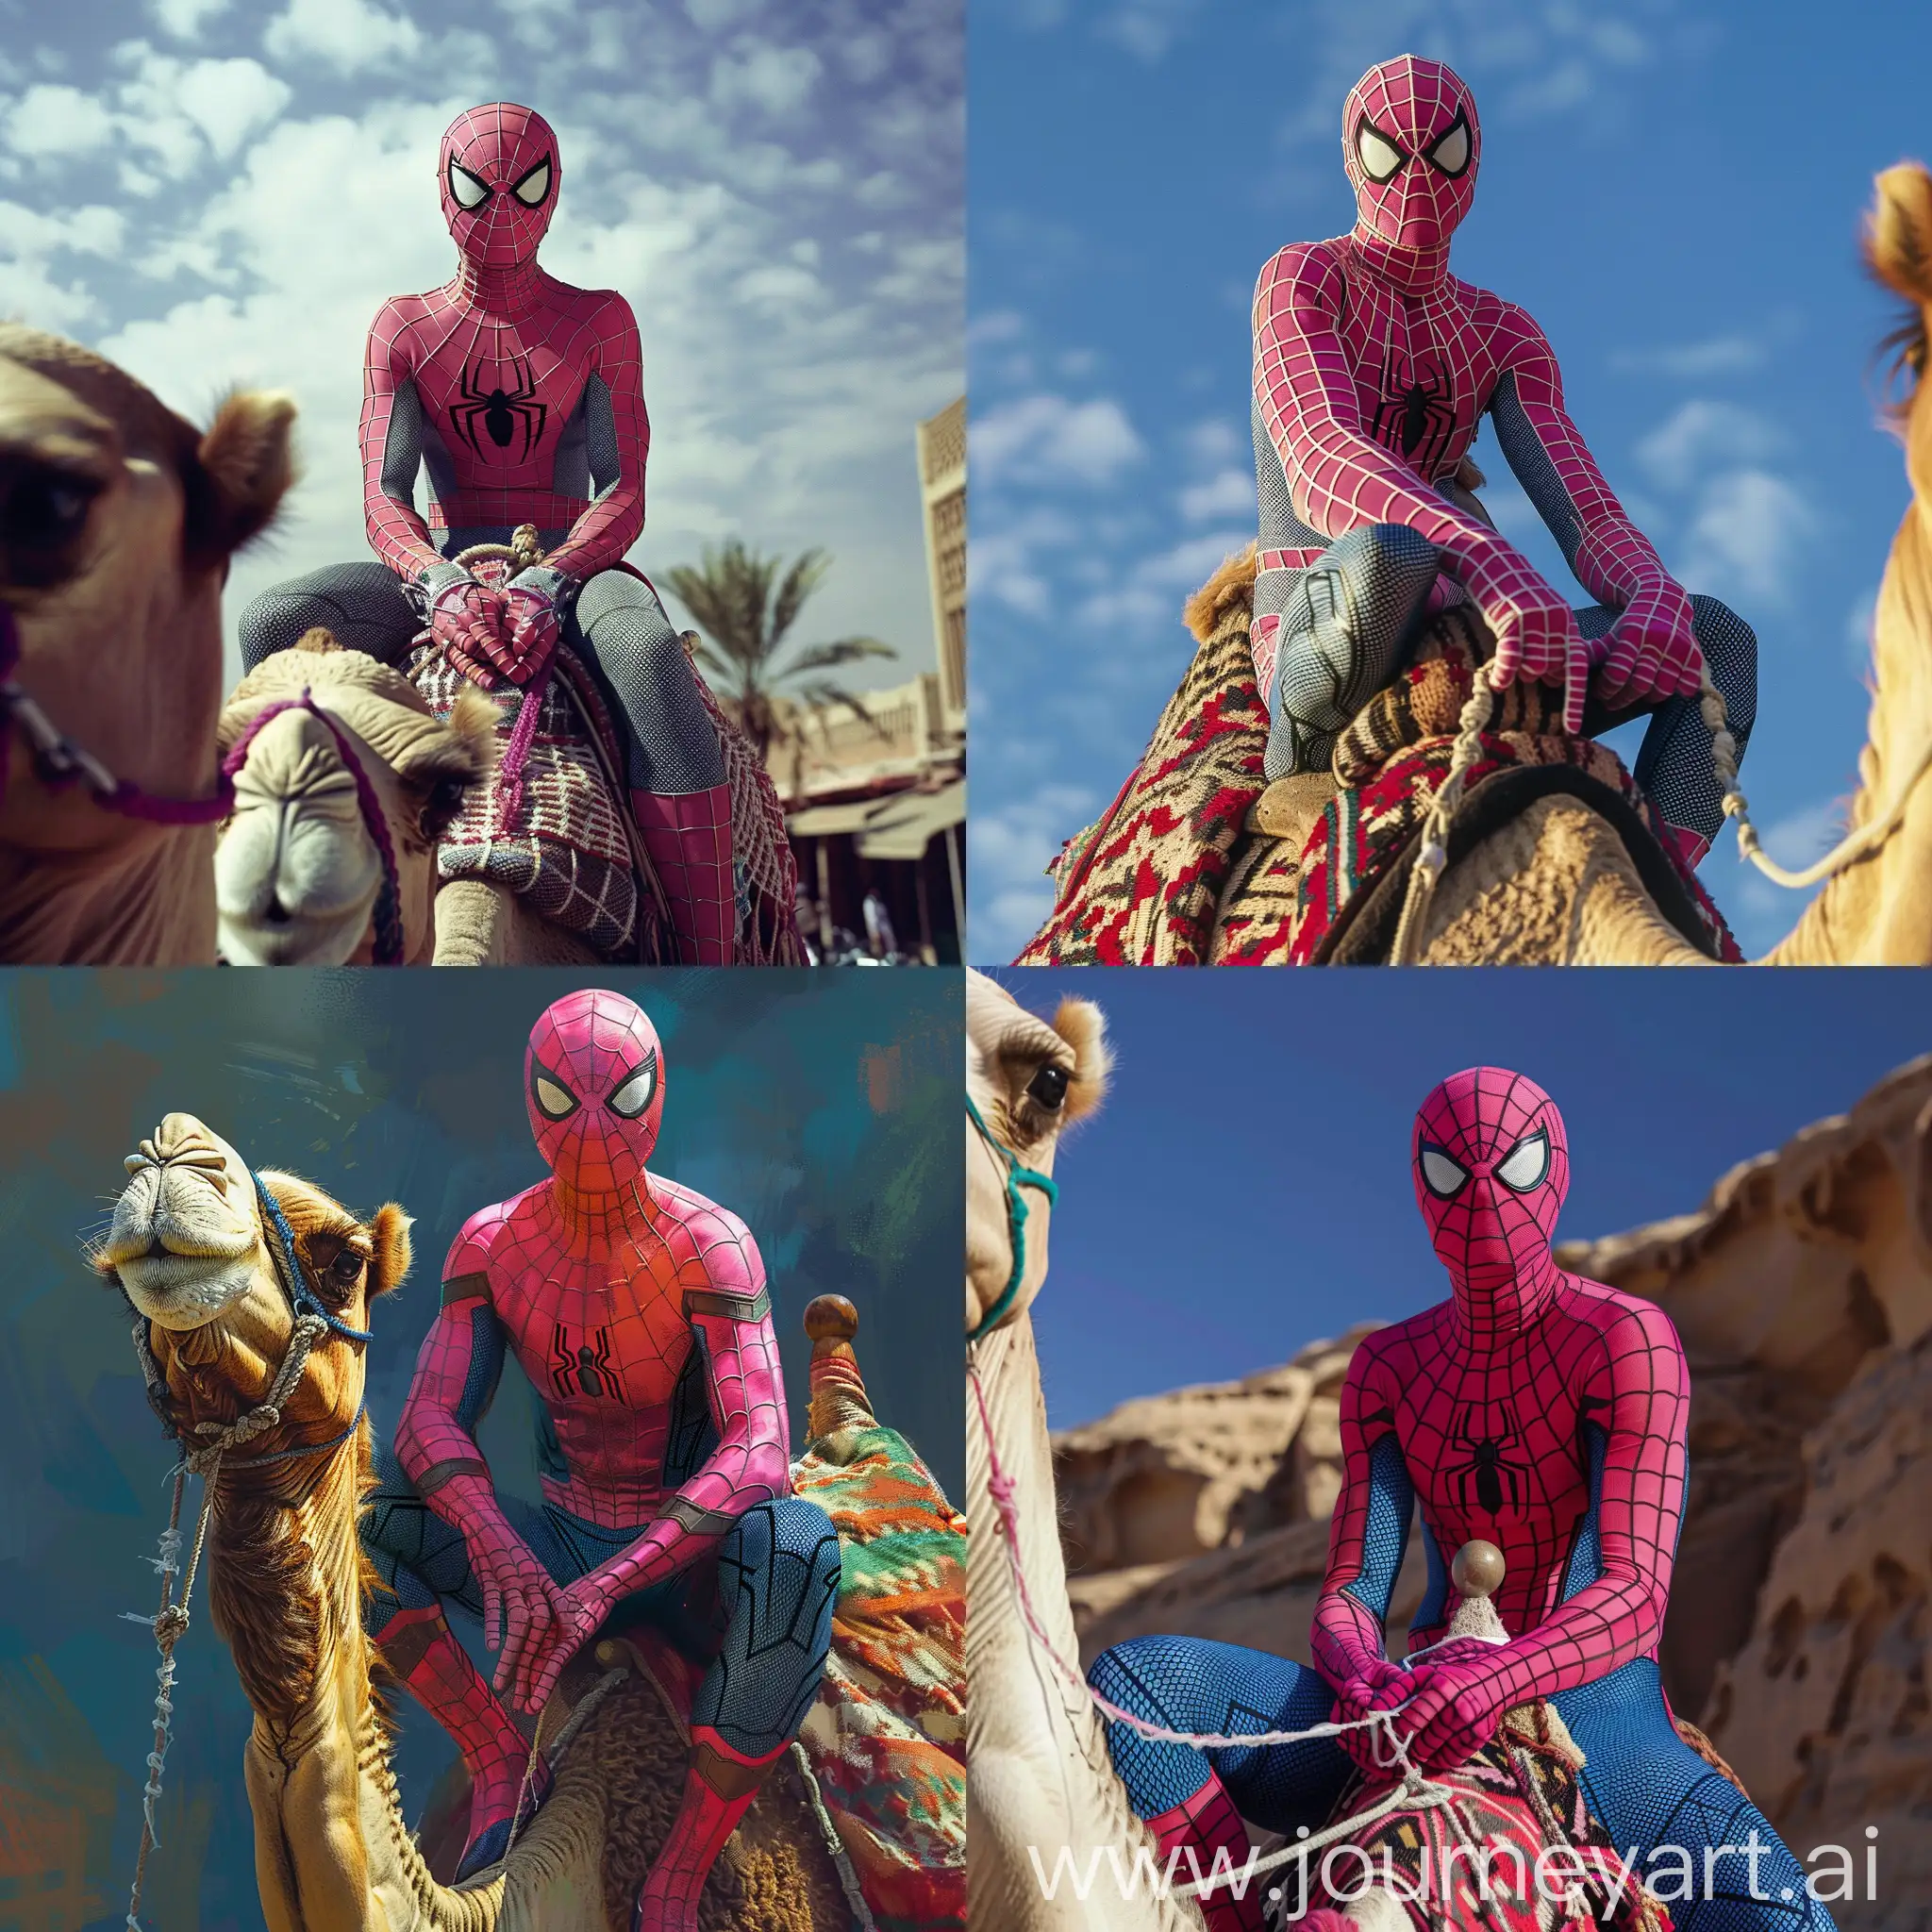 Superhero-in-Desert-Outfit-with-Camel